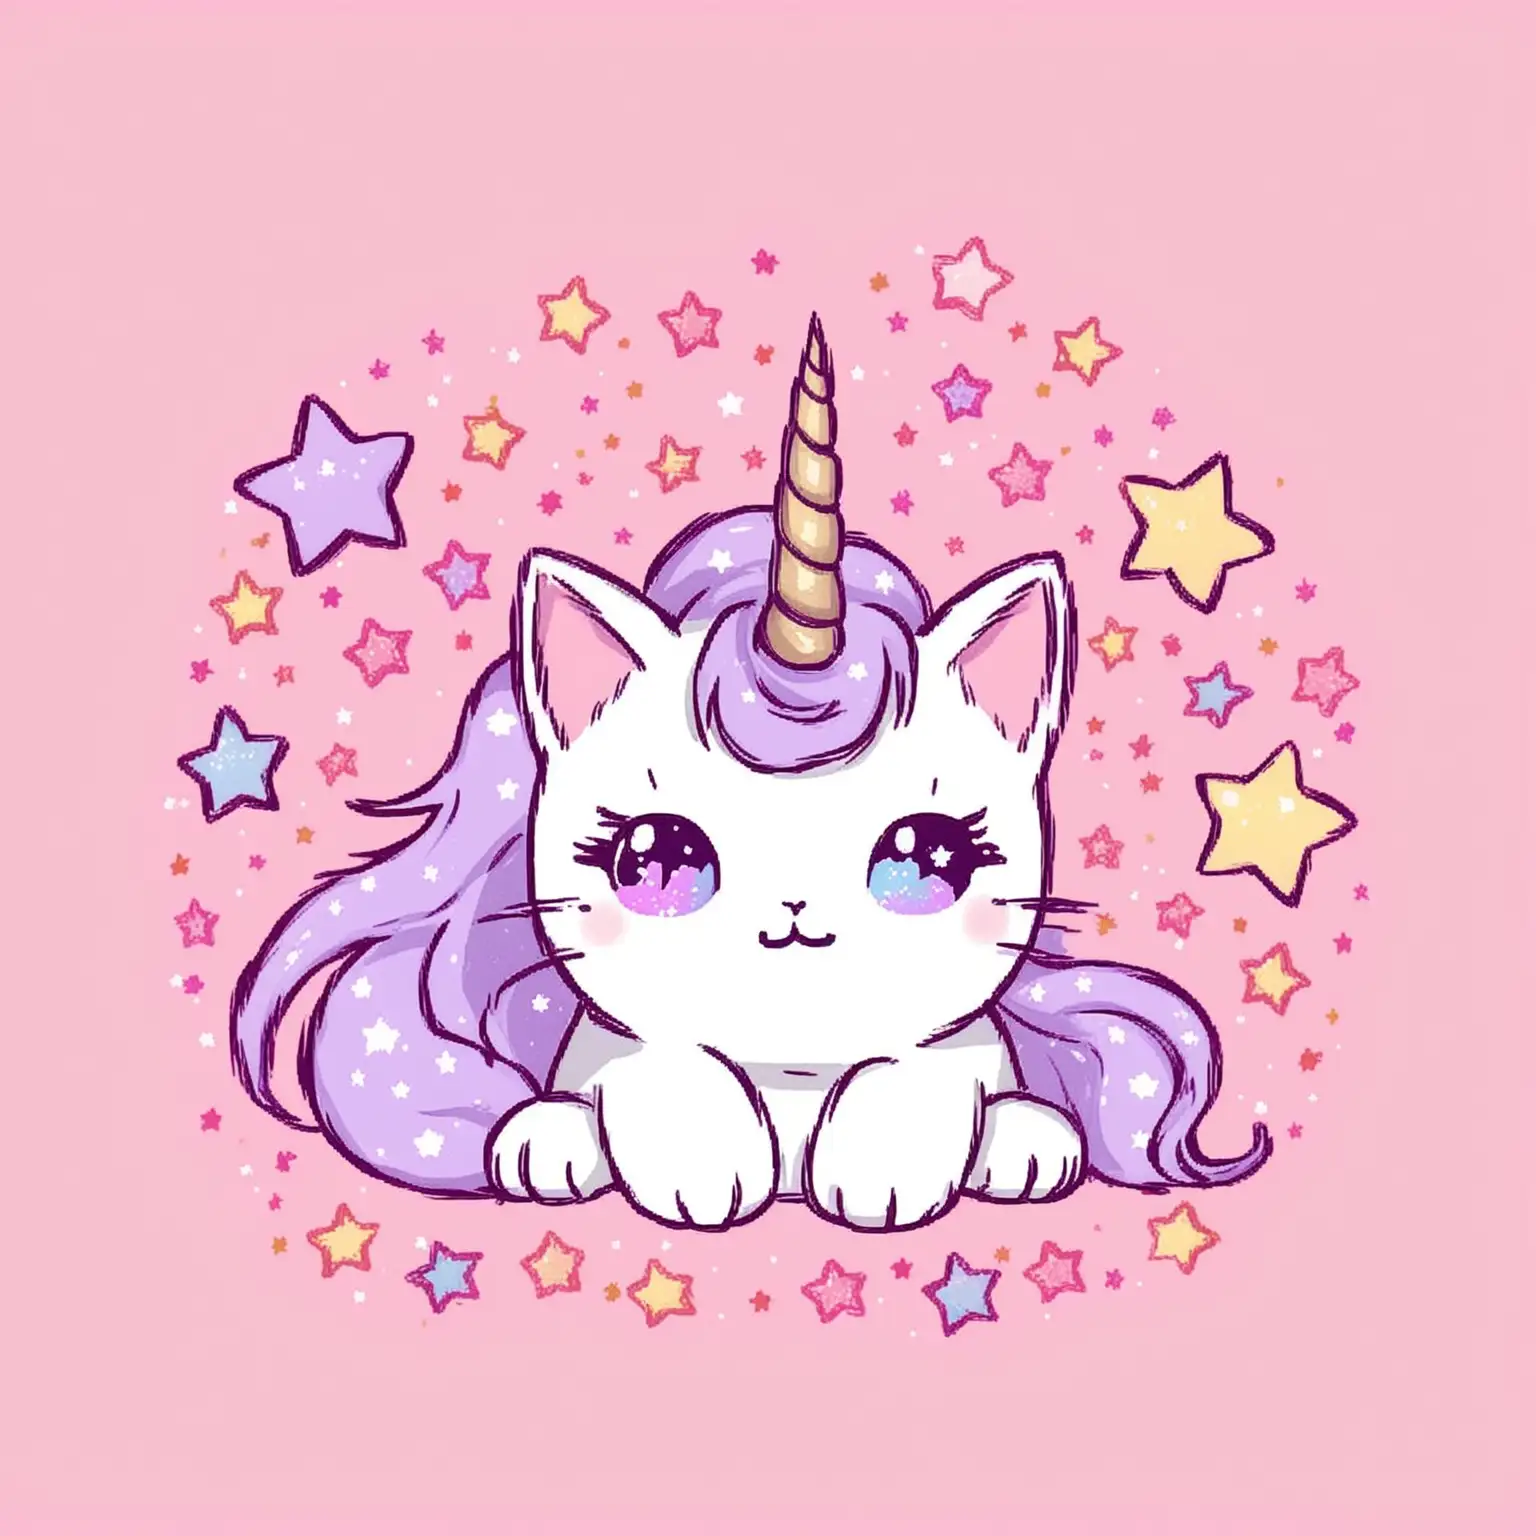 Adorable Cat with Unicorn Horn on Pink Starry Background